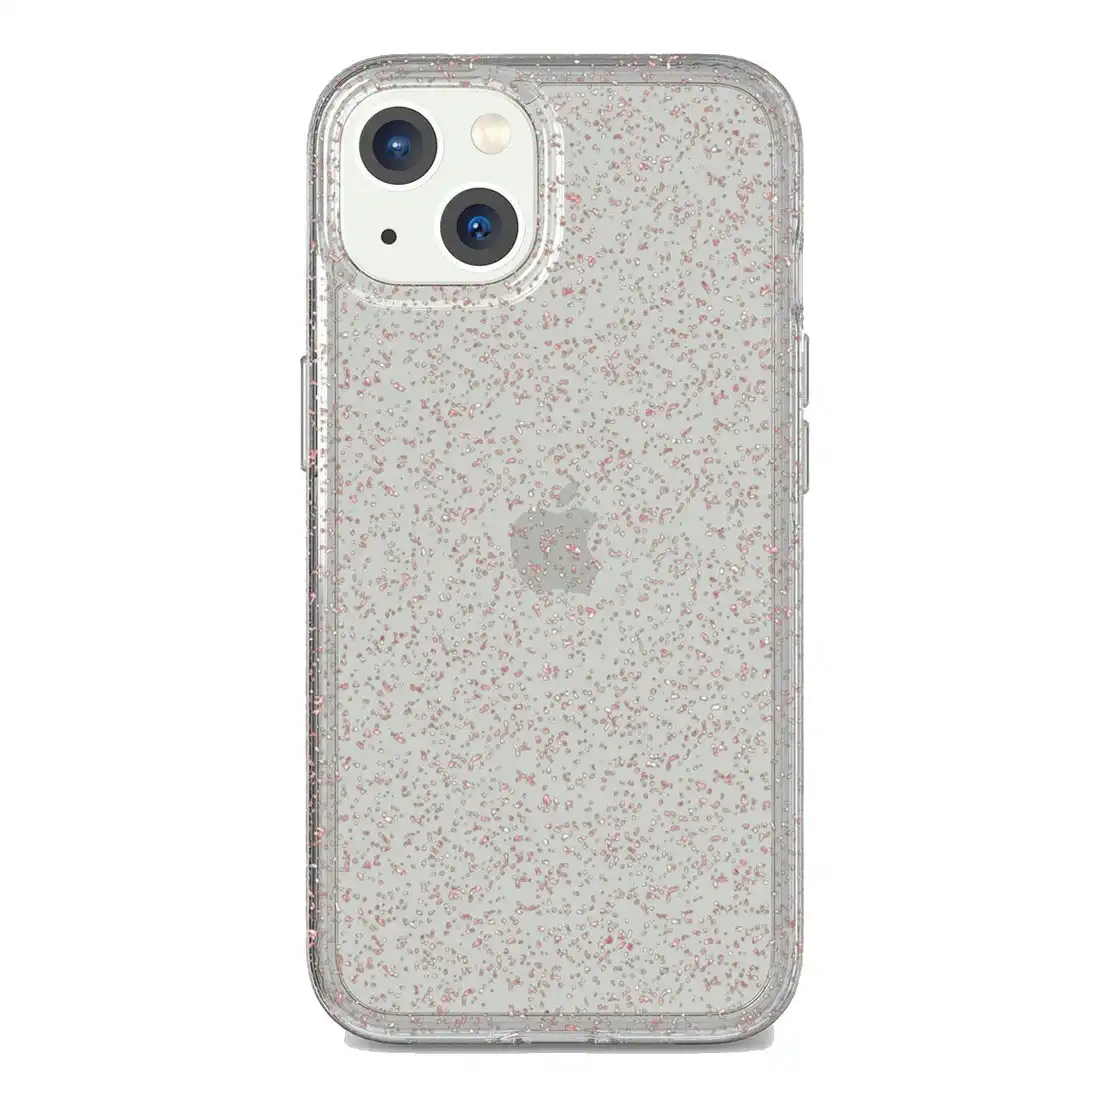 Tech21 Evo Sparkle Case for iPhone 13 T21-8954 - Rose Gold